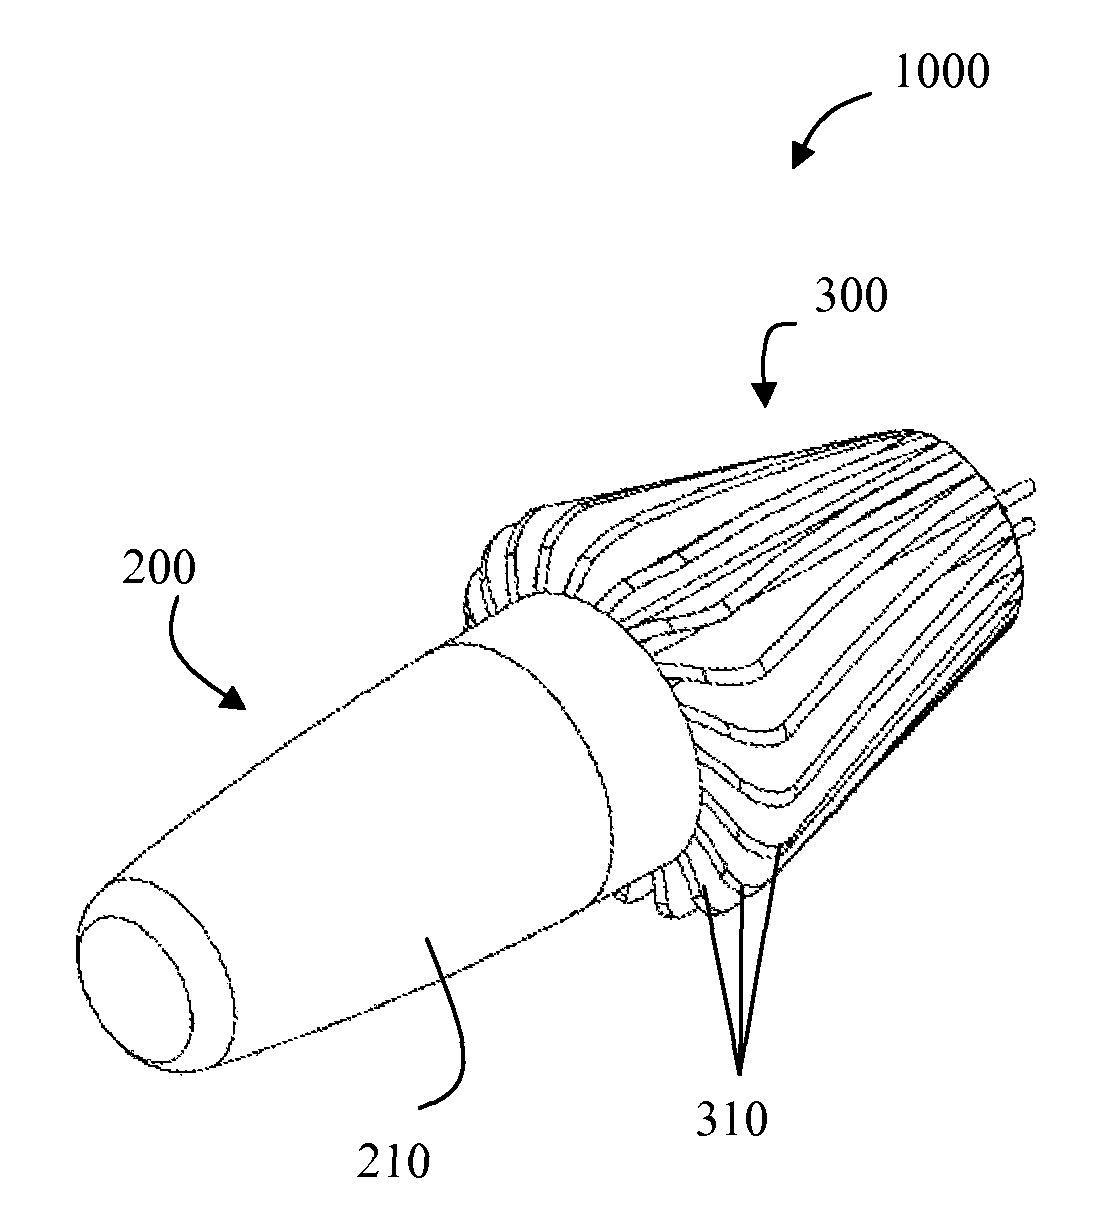 Illumination apparatus for conducting and dissipating heat from a light source